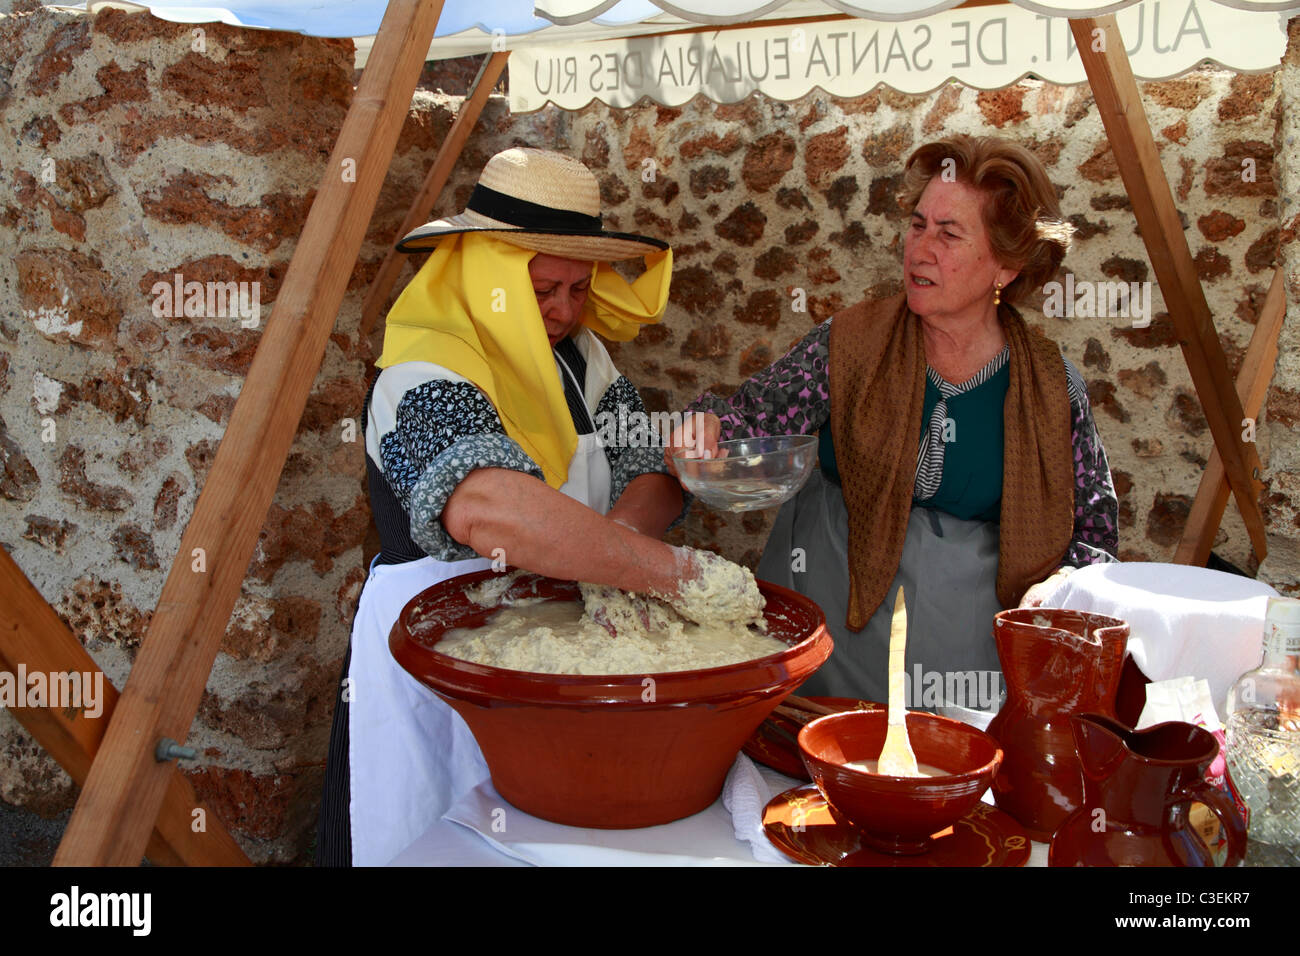 Ladies in traditional costume baking at a Handicraft Fair, Ibiza, Spain Stock Photo